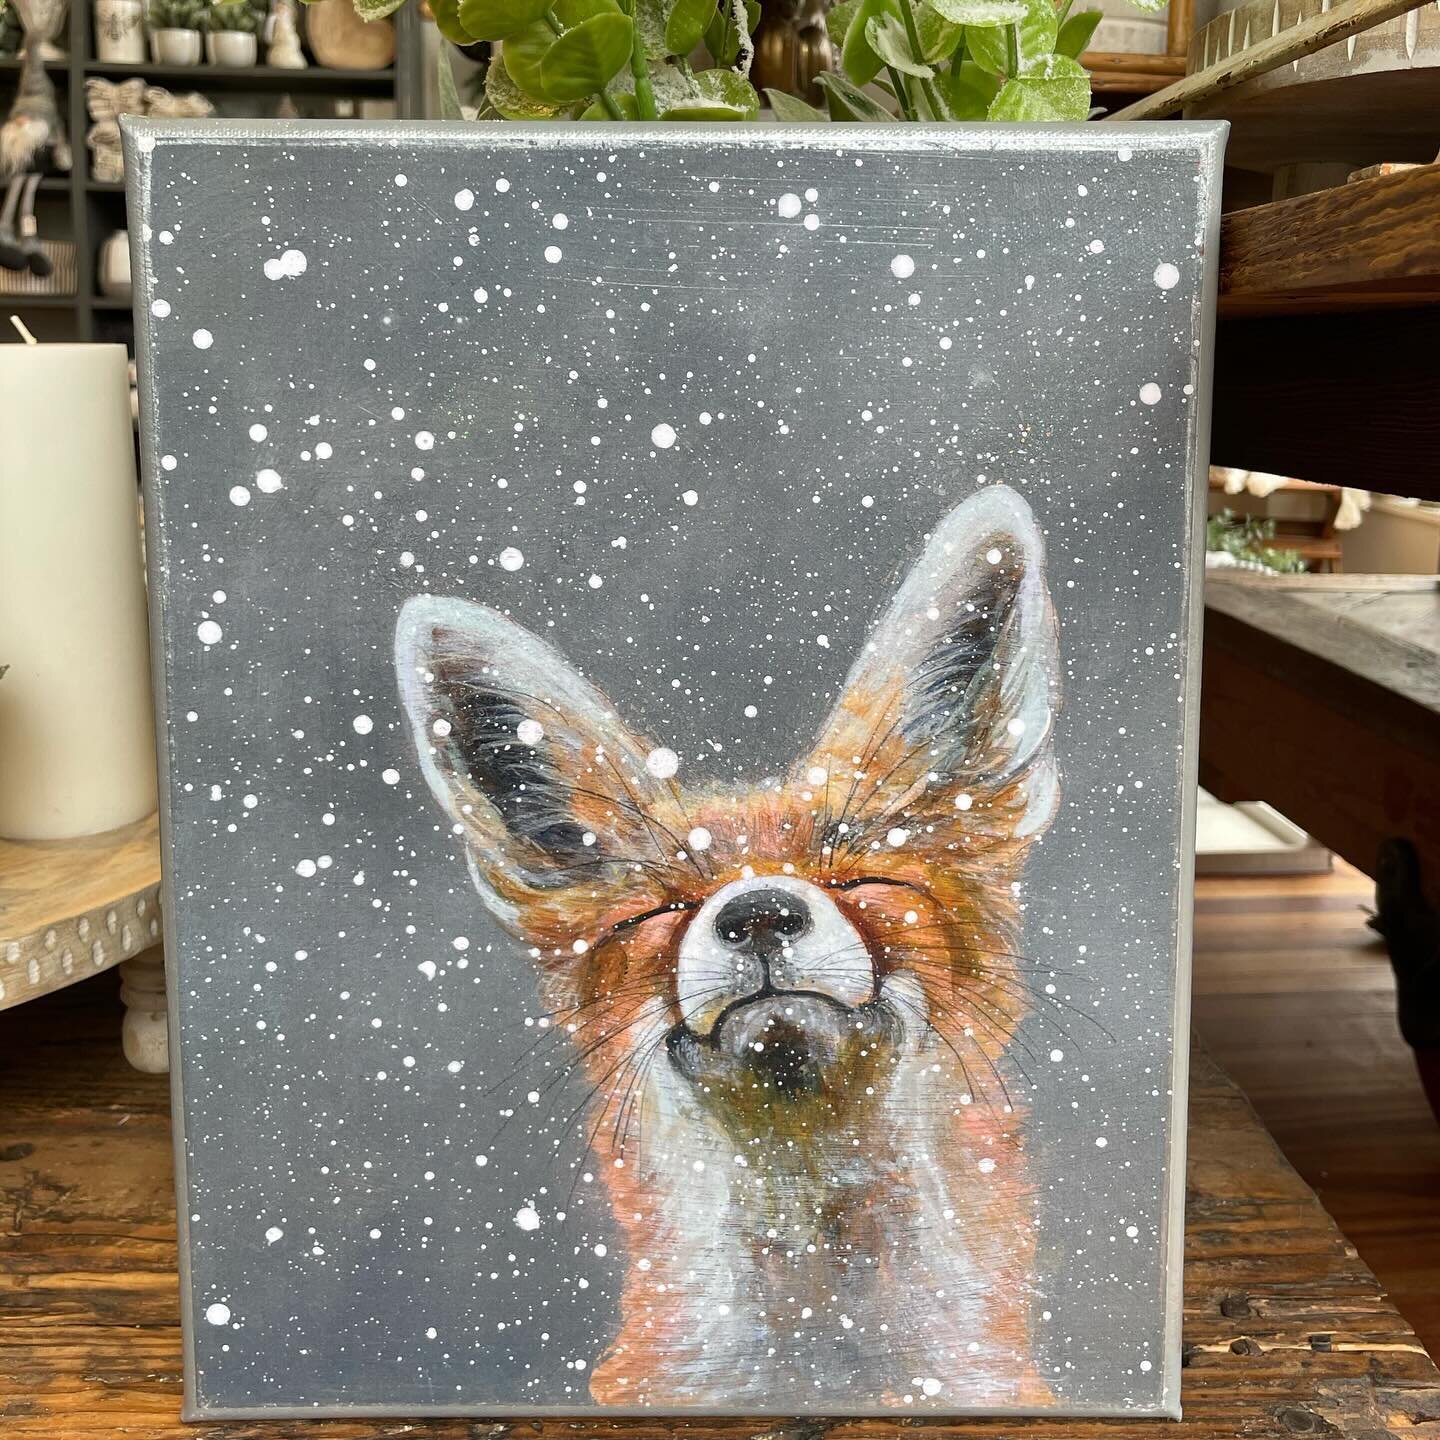 2 days left to shop before our winter break and 2 days left to shop our sale! Everything in the store is 10% off including all of mom&rsquo;s everyday and winter prints, plus all her originals that are currently in the shop are 20-30% off! Were open 